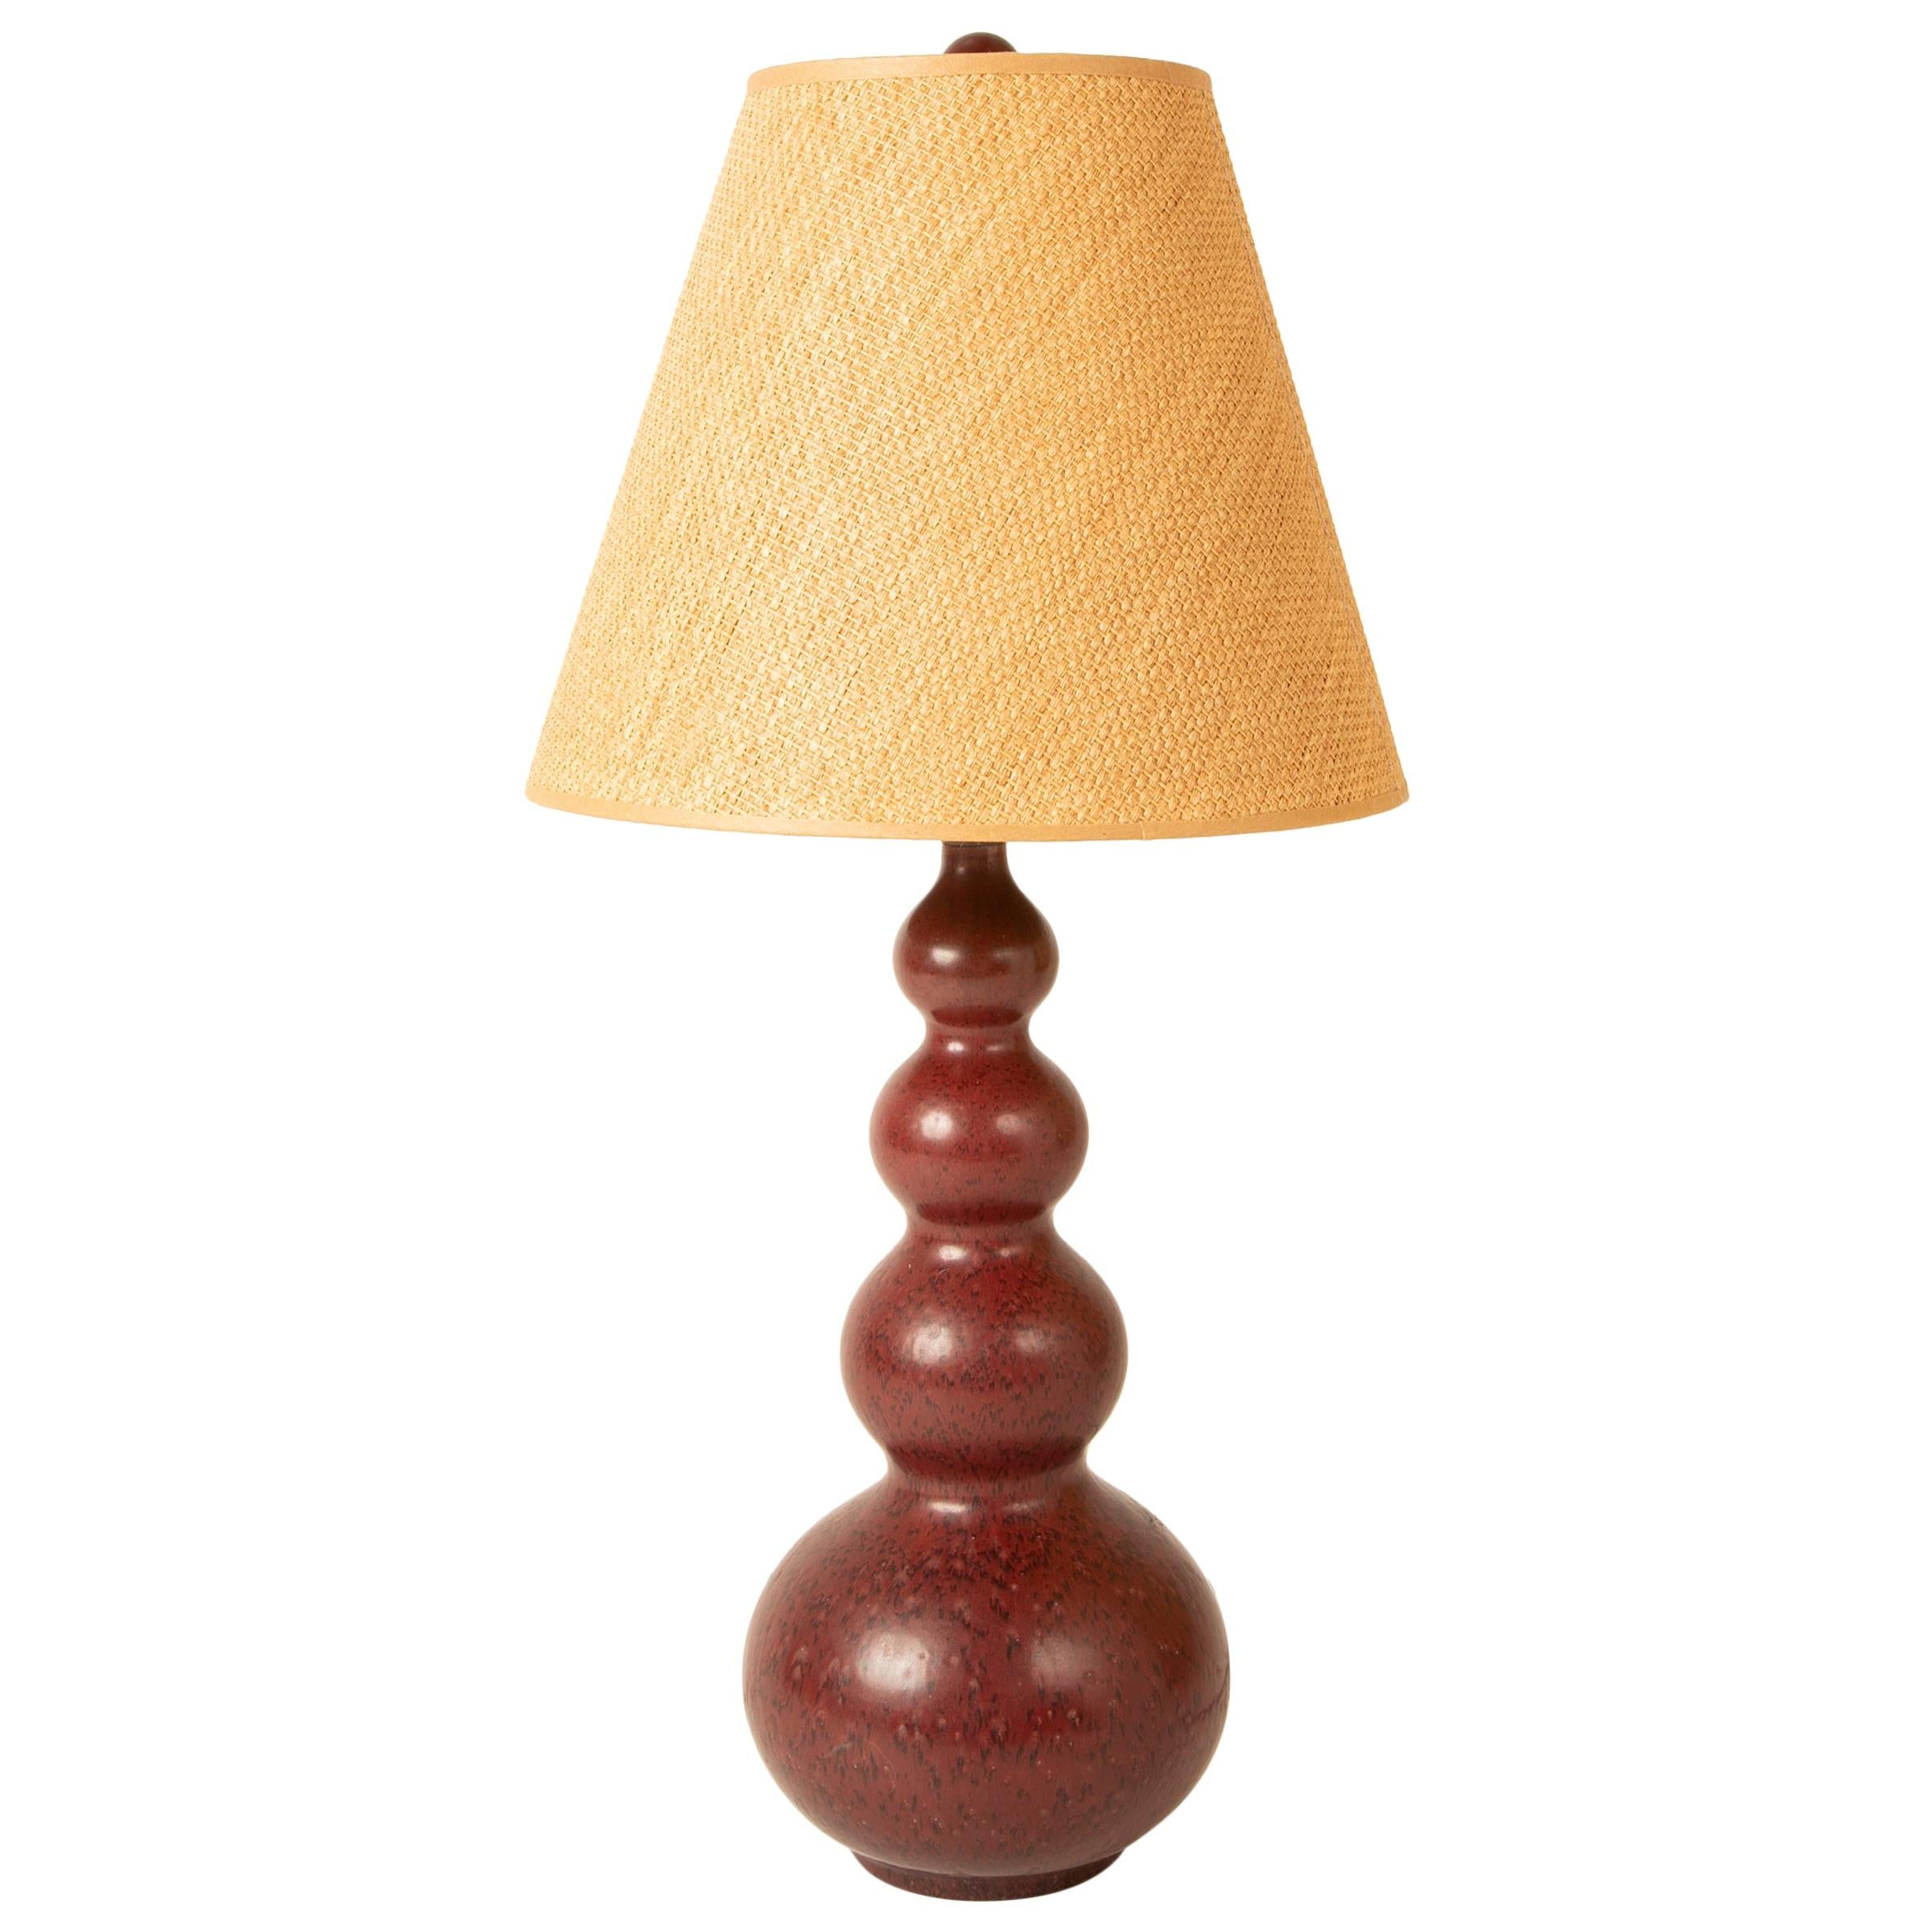 Oxblood Glazed Stoneware Lamp by Axel Salto For Sale